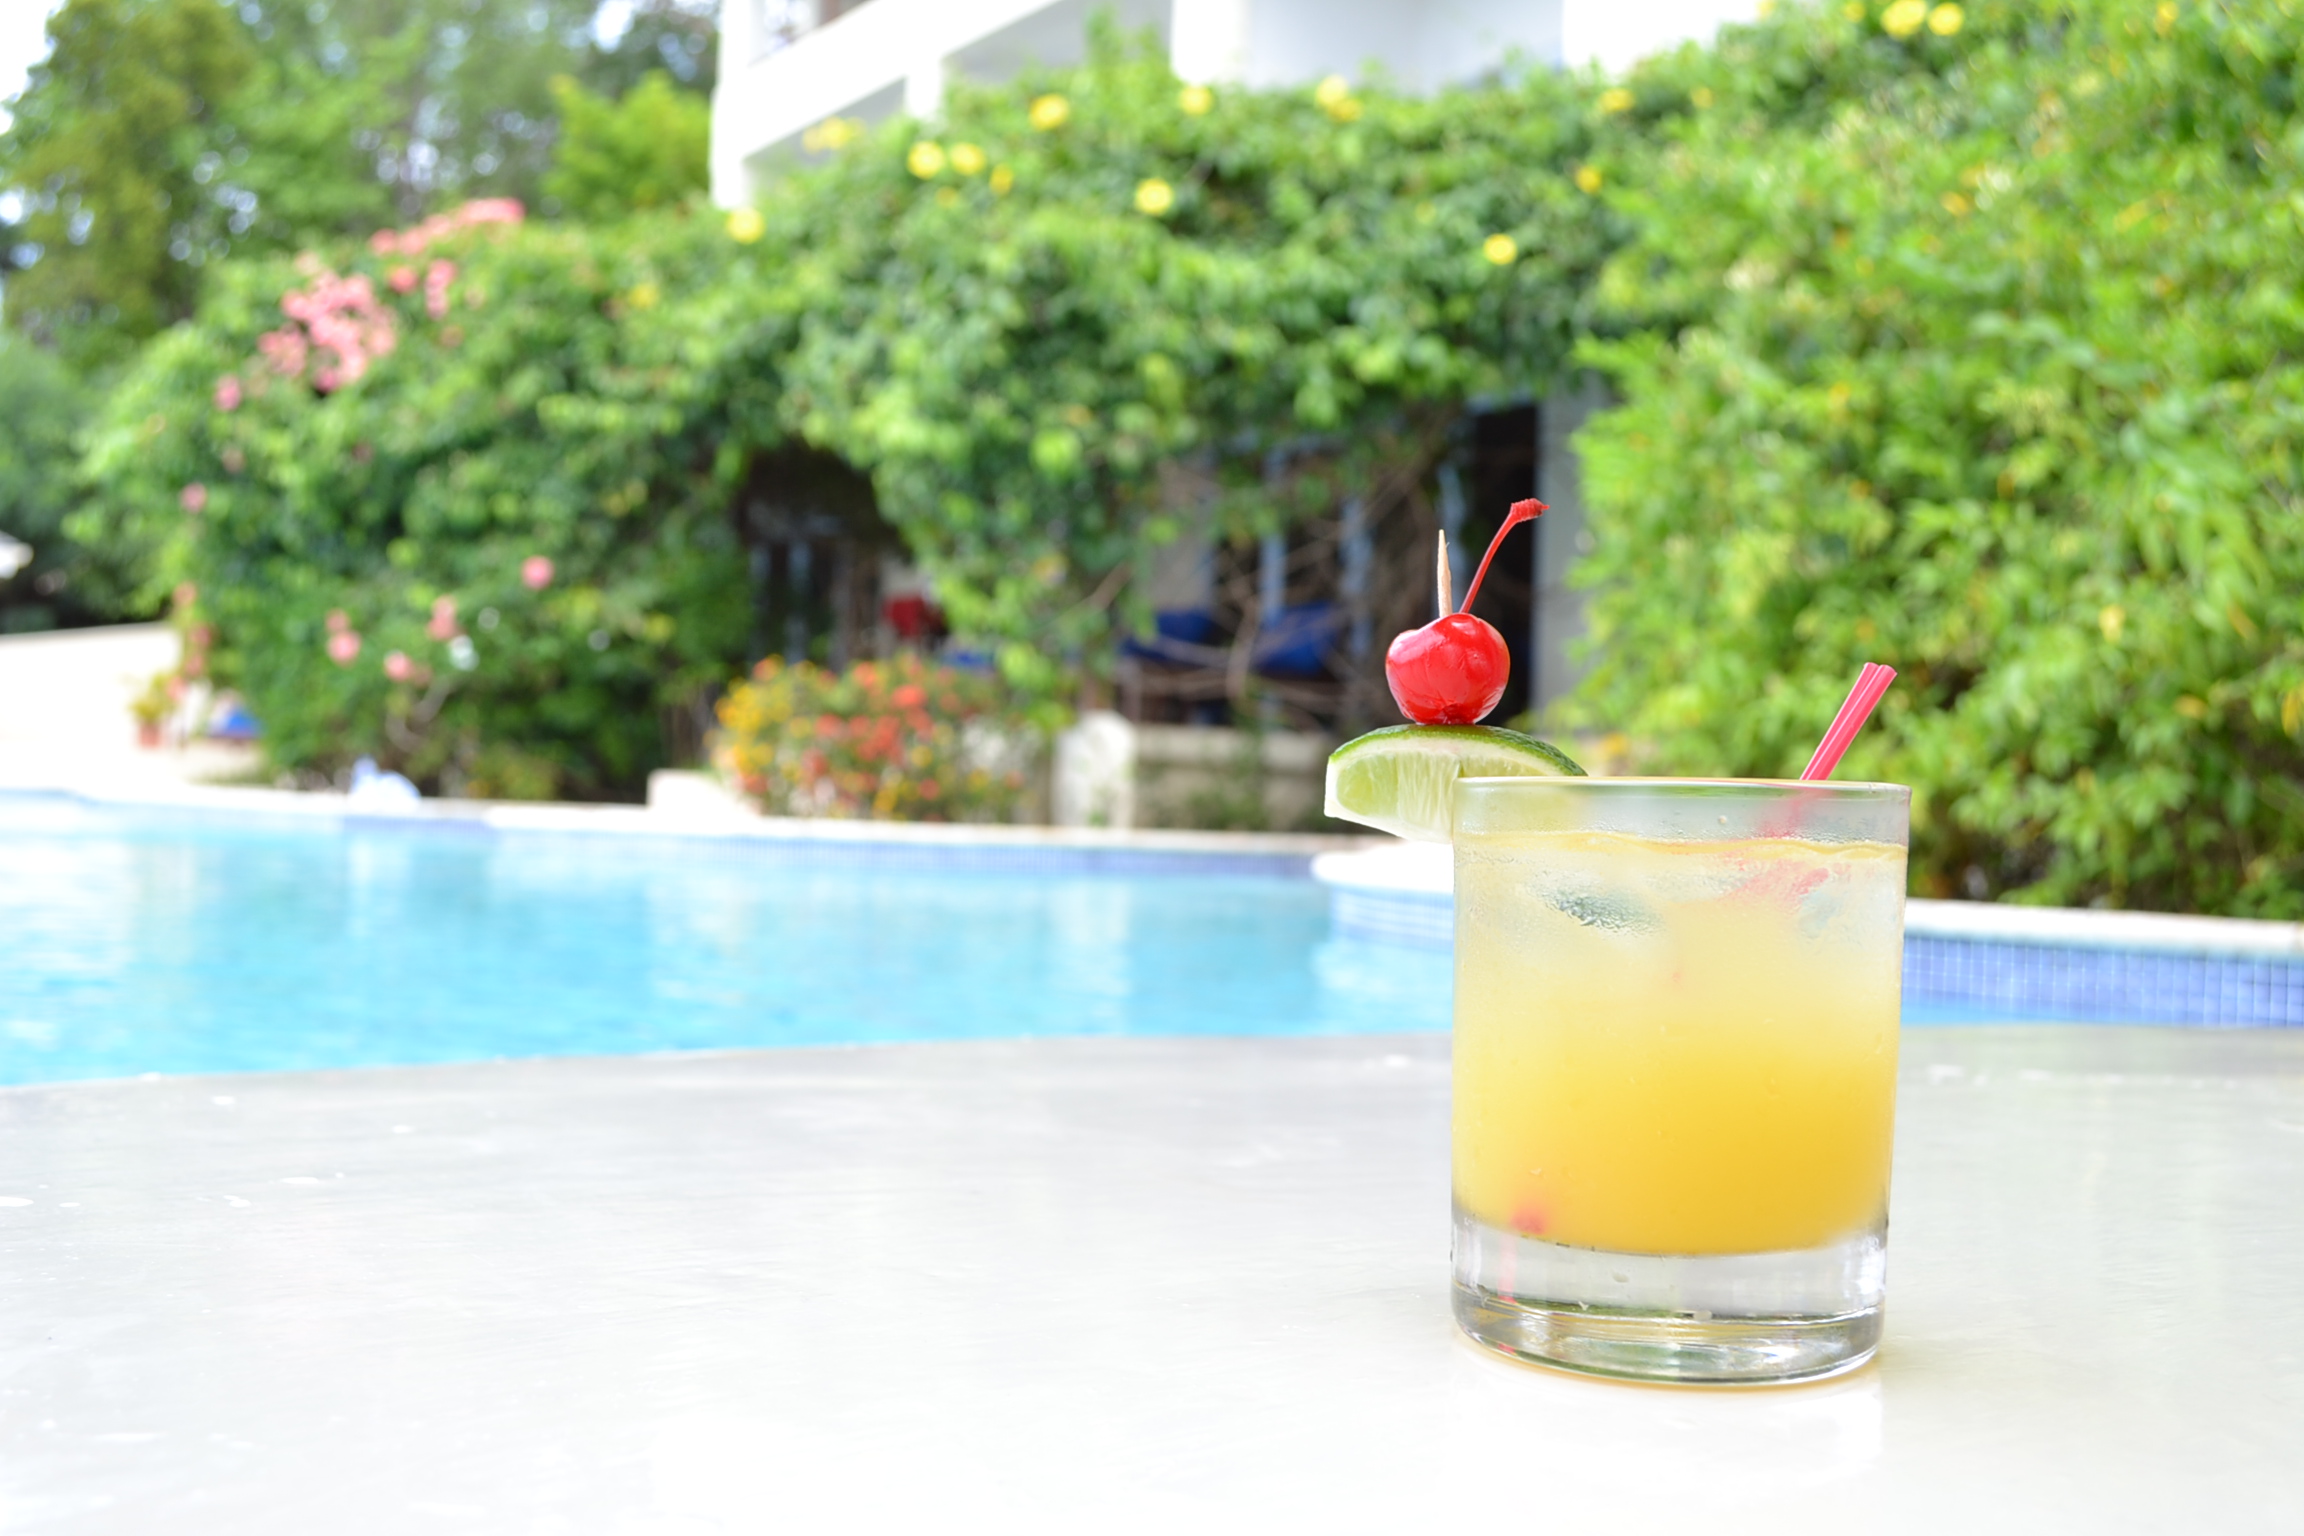 The swim-up pool bar at Calabash Cove is refreshing!